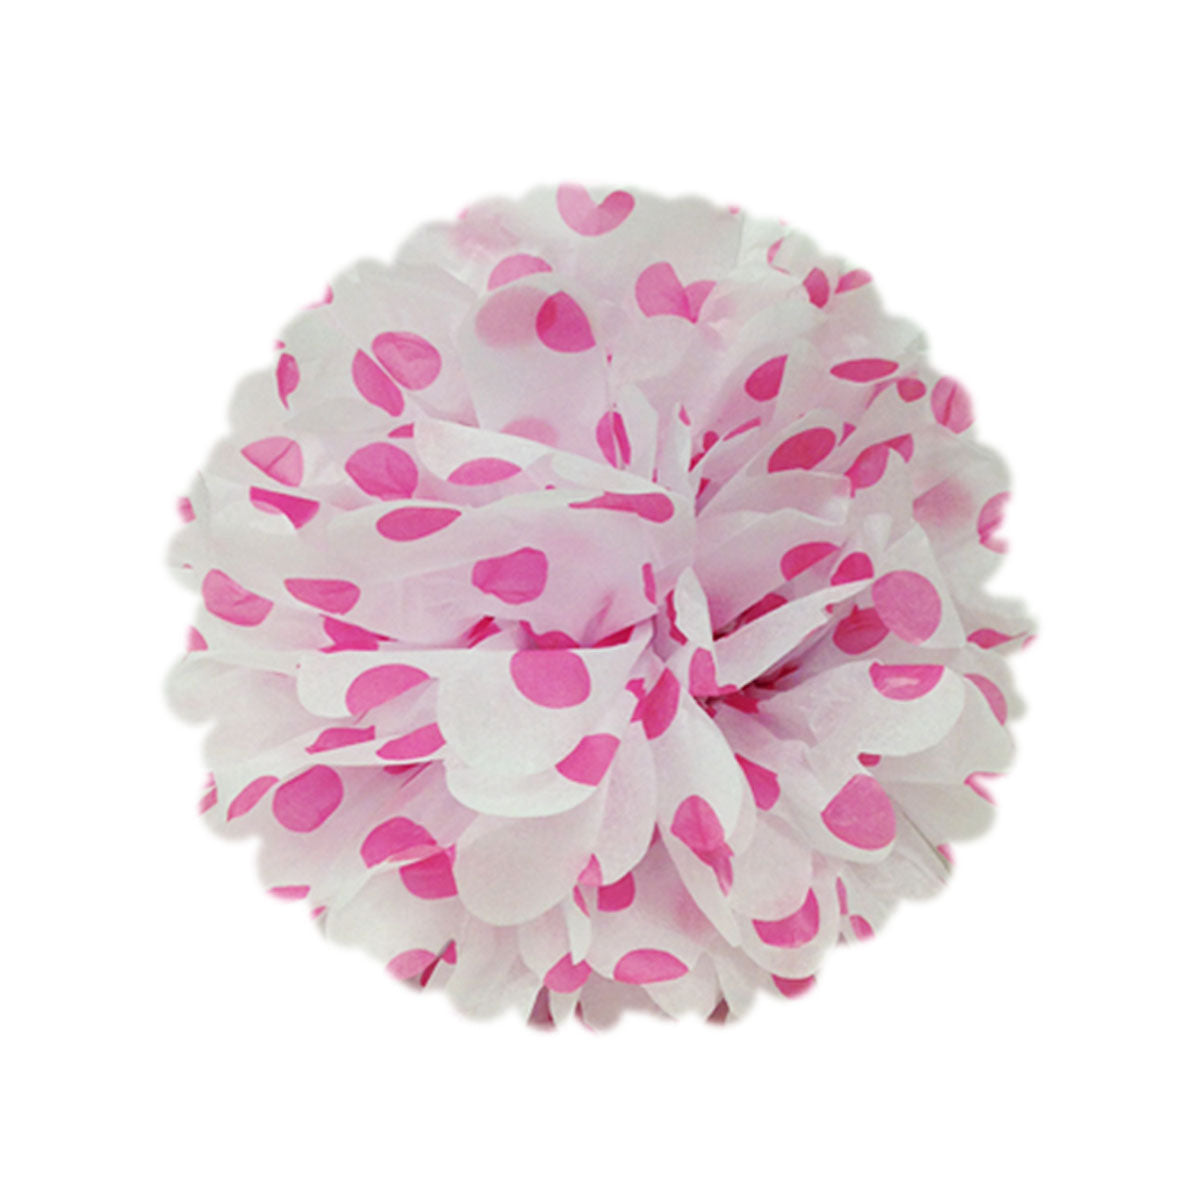 Wrapables 8 inch Set of 5 Tissue Pom Poms Party Decorations for Weddings, Birthday Parties Baby Showers and Nursery Dcor, Light Pink Polka Dots